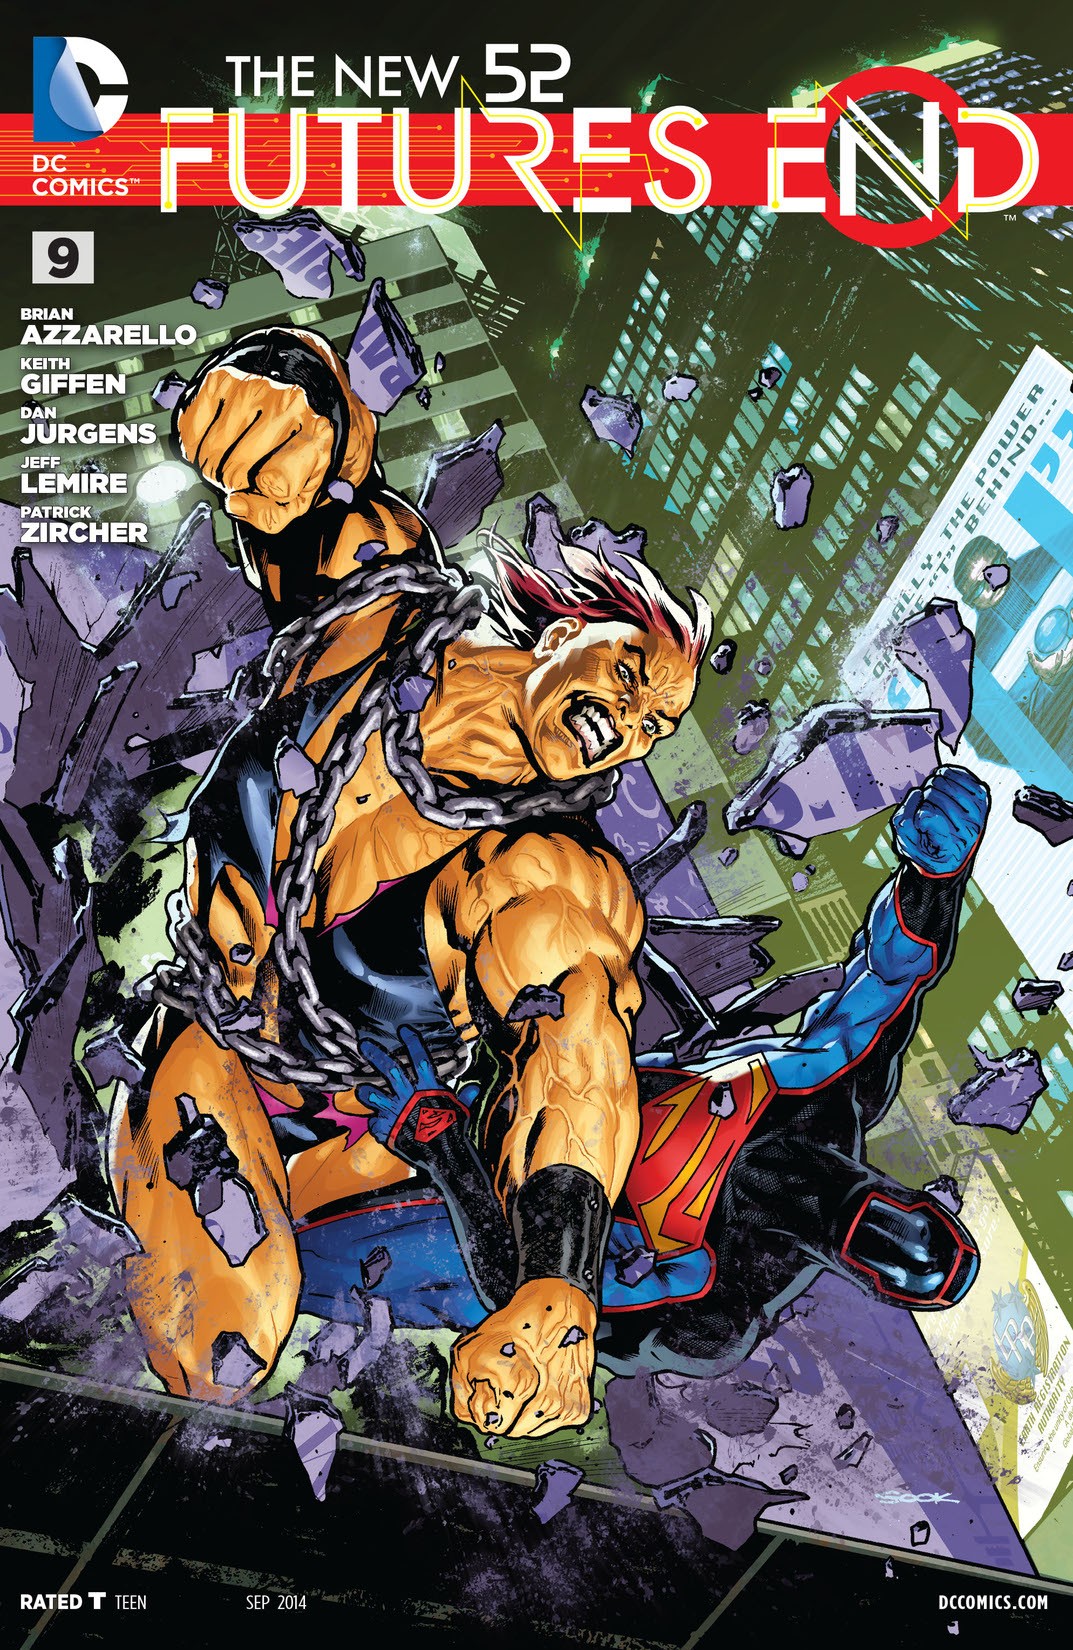 The New 52: Futures End #9 preview images